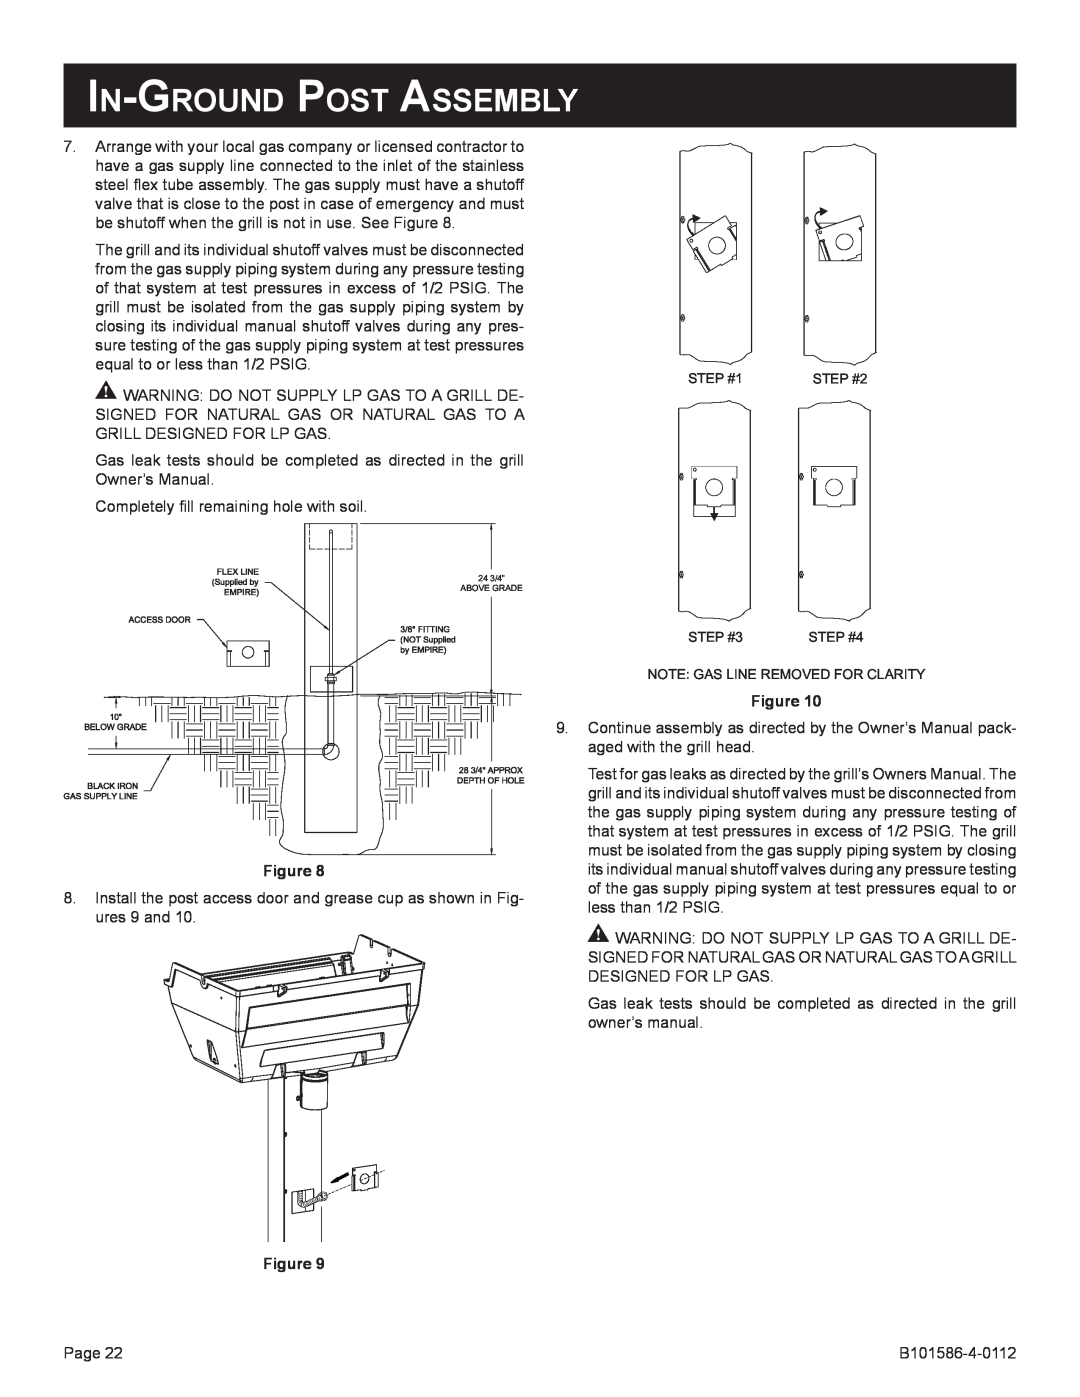 Broilmaster B101652, DCB1-2 In-Ground Post Assembly, STEP #1, STEP #3 STEP #4 NOTE GAS LINE REMOVED FOR CLARITY, STEP #2 